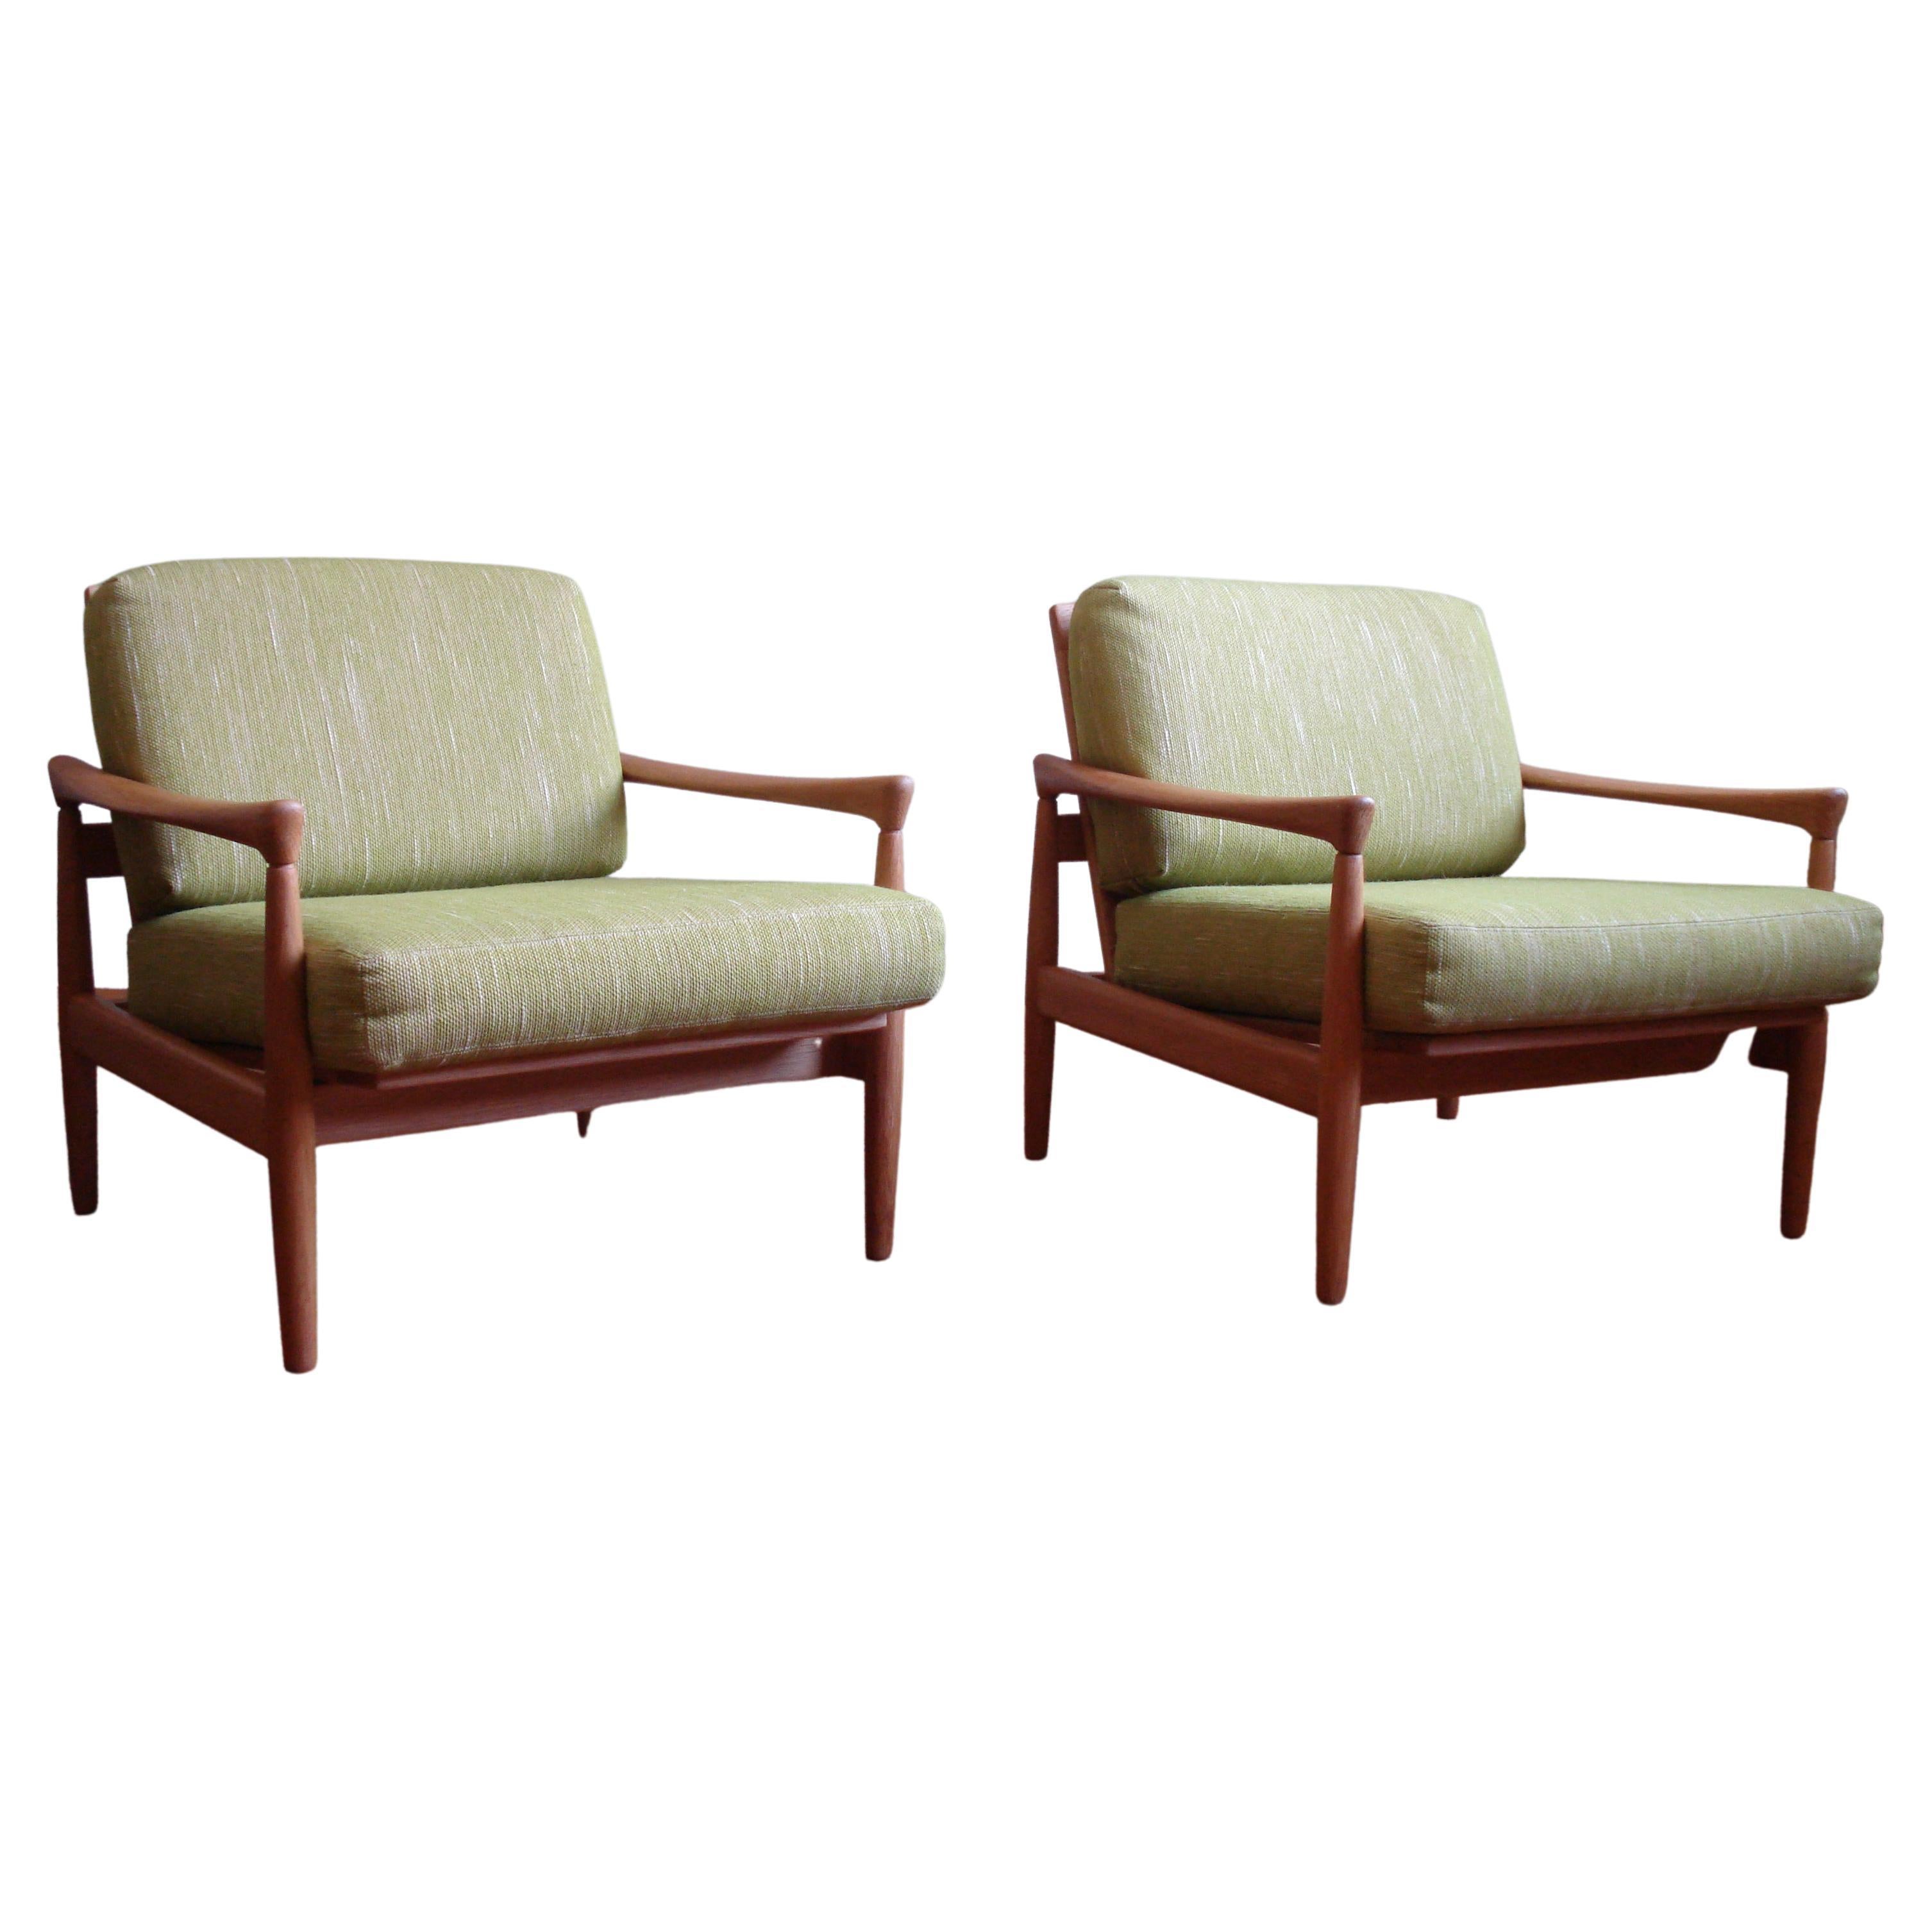 Set of 2 Erik Wørtz Chairs "Kolding" Chairs for IKEA, 1960a For Sale